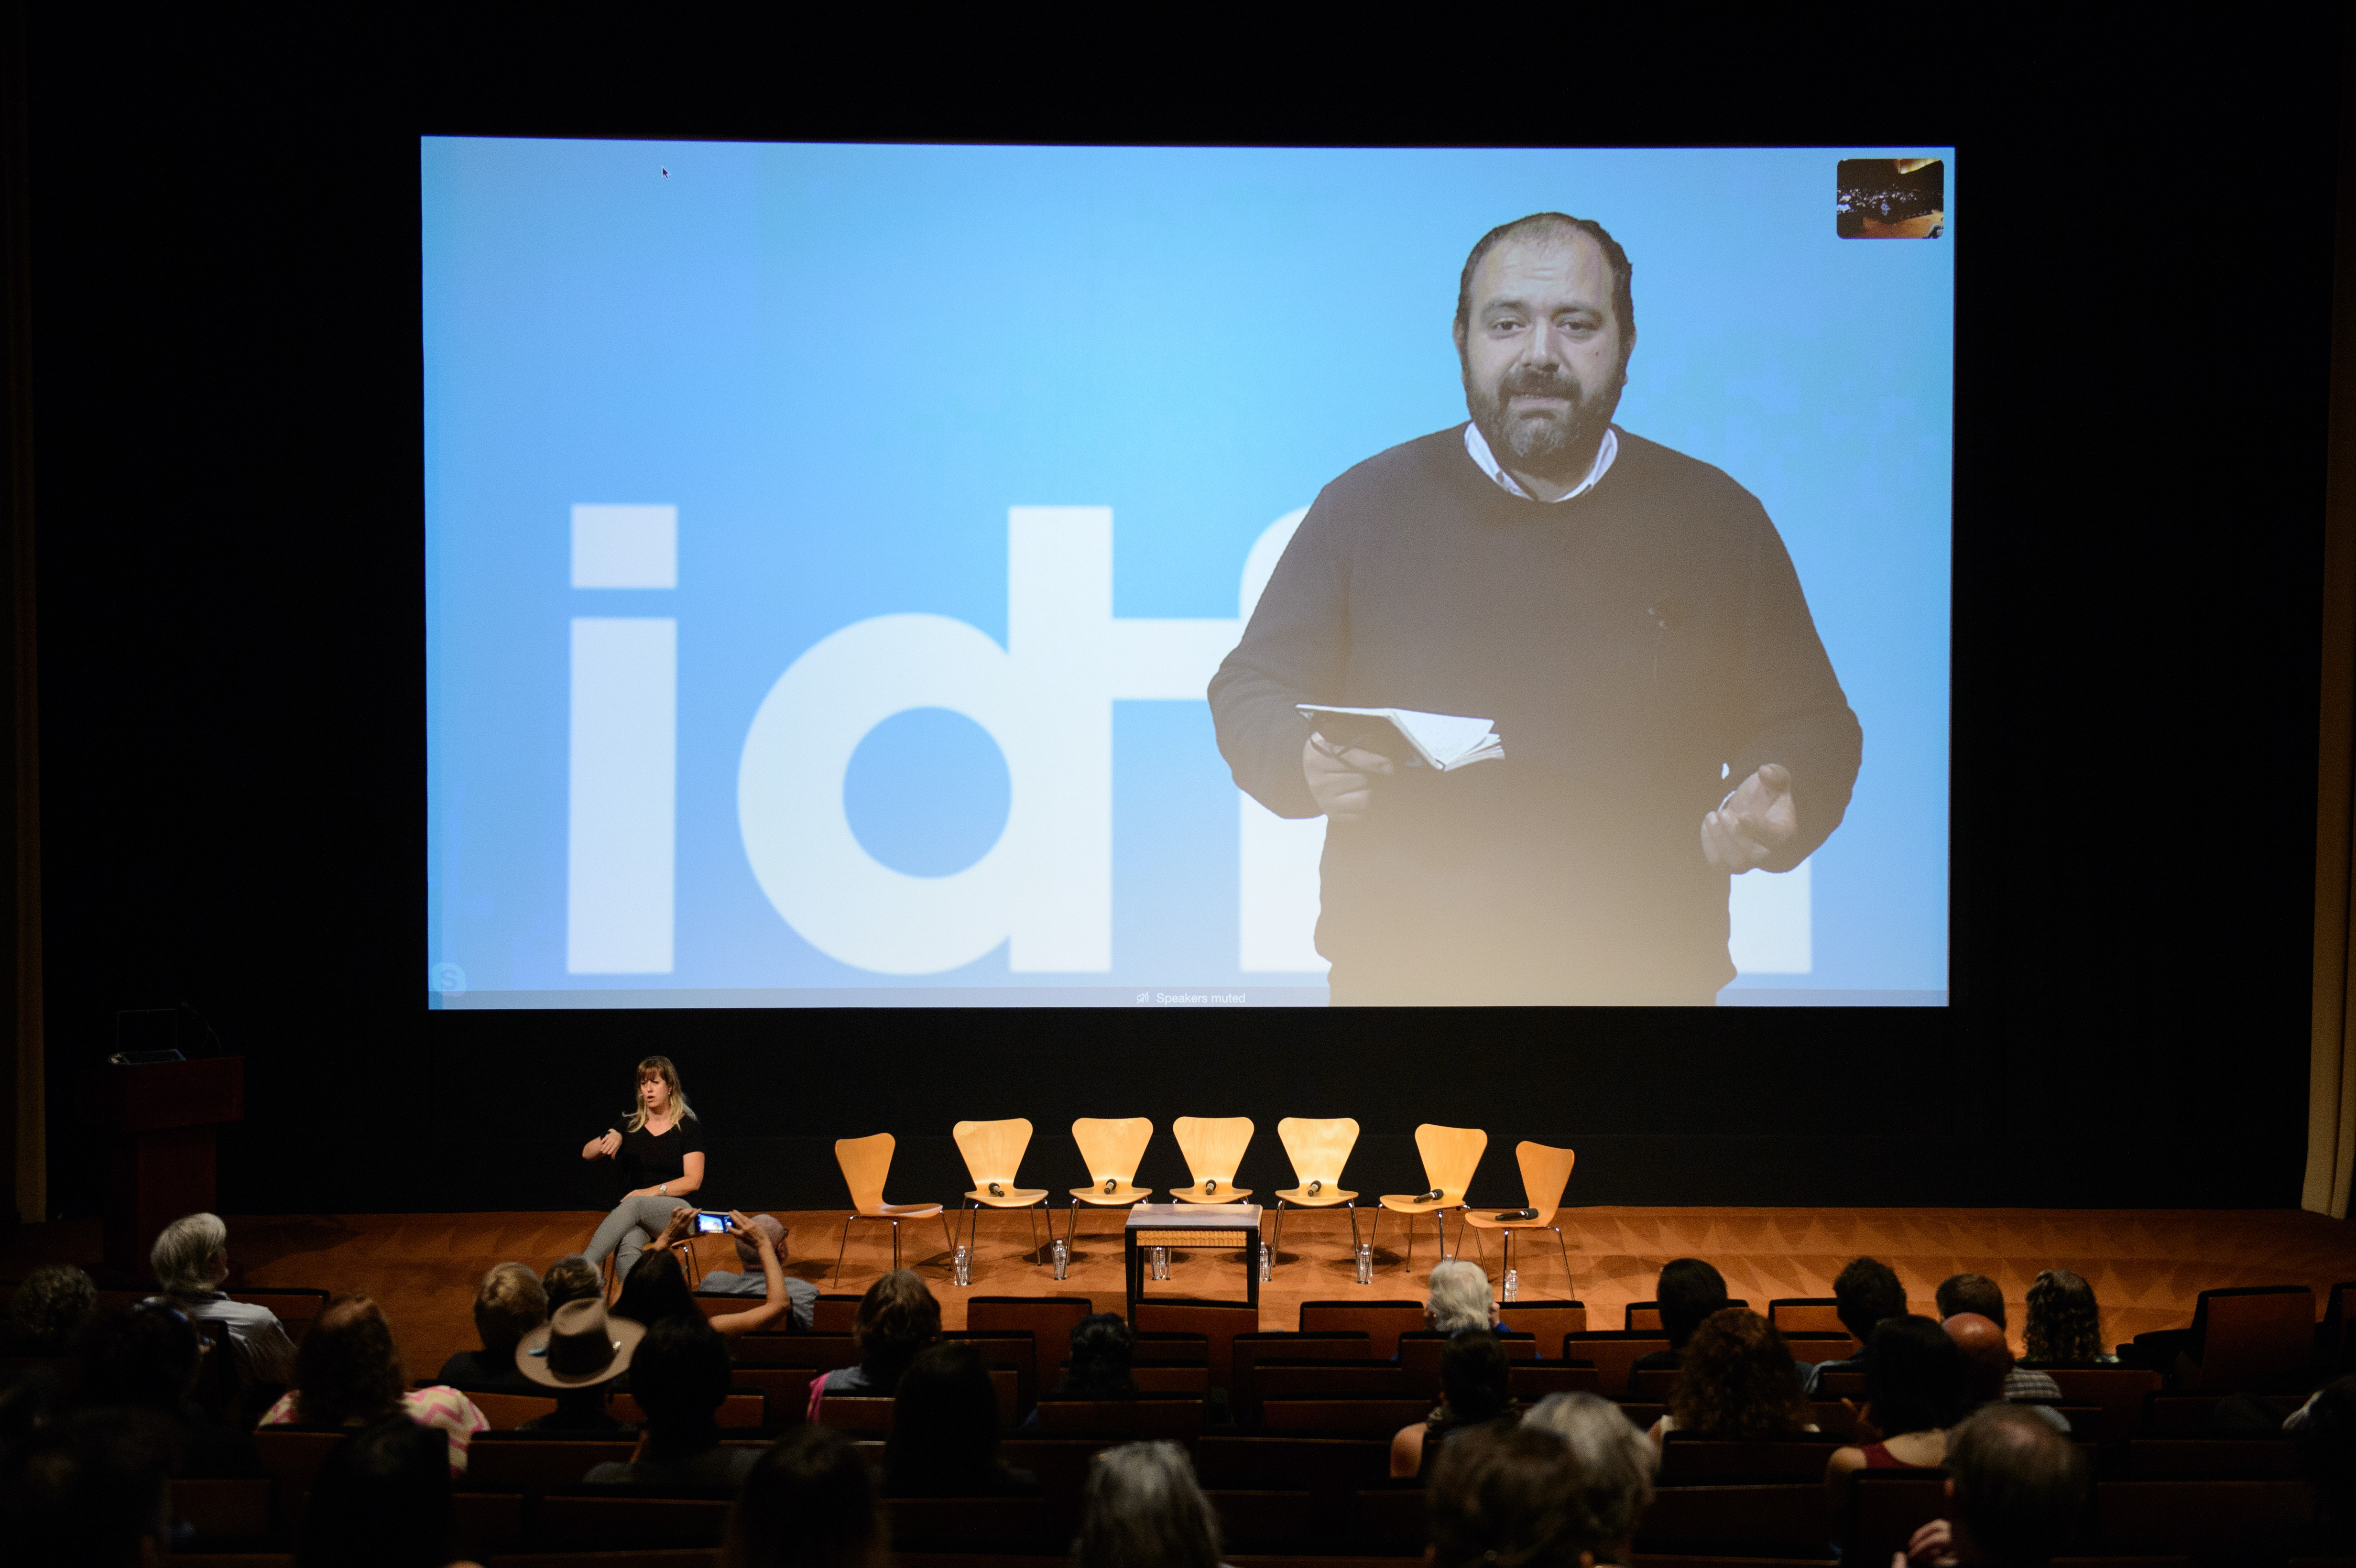 IDFA Artistic Director Orwa Nyrabia, shown delivering a keynote address on a large screen at the 2018 Getting Real conference, is a Syrian man with a beard, wearing a dark sweater. Photo courtesy of AMPAS